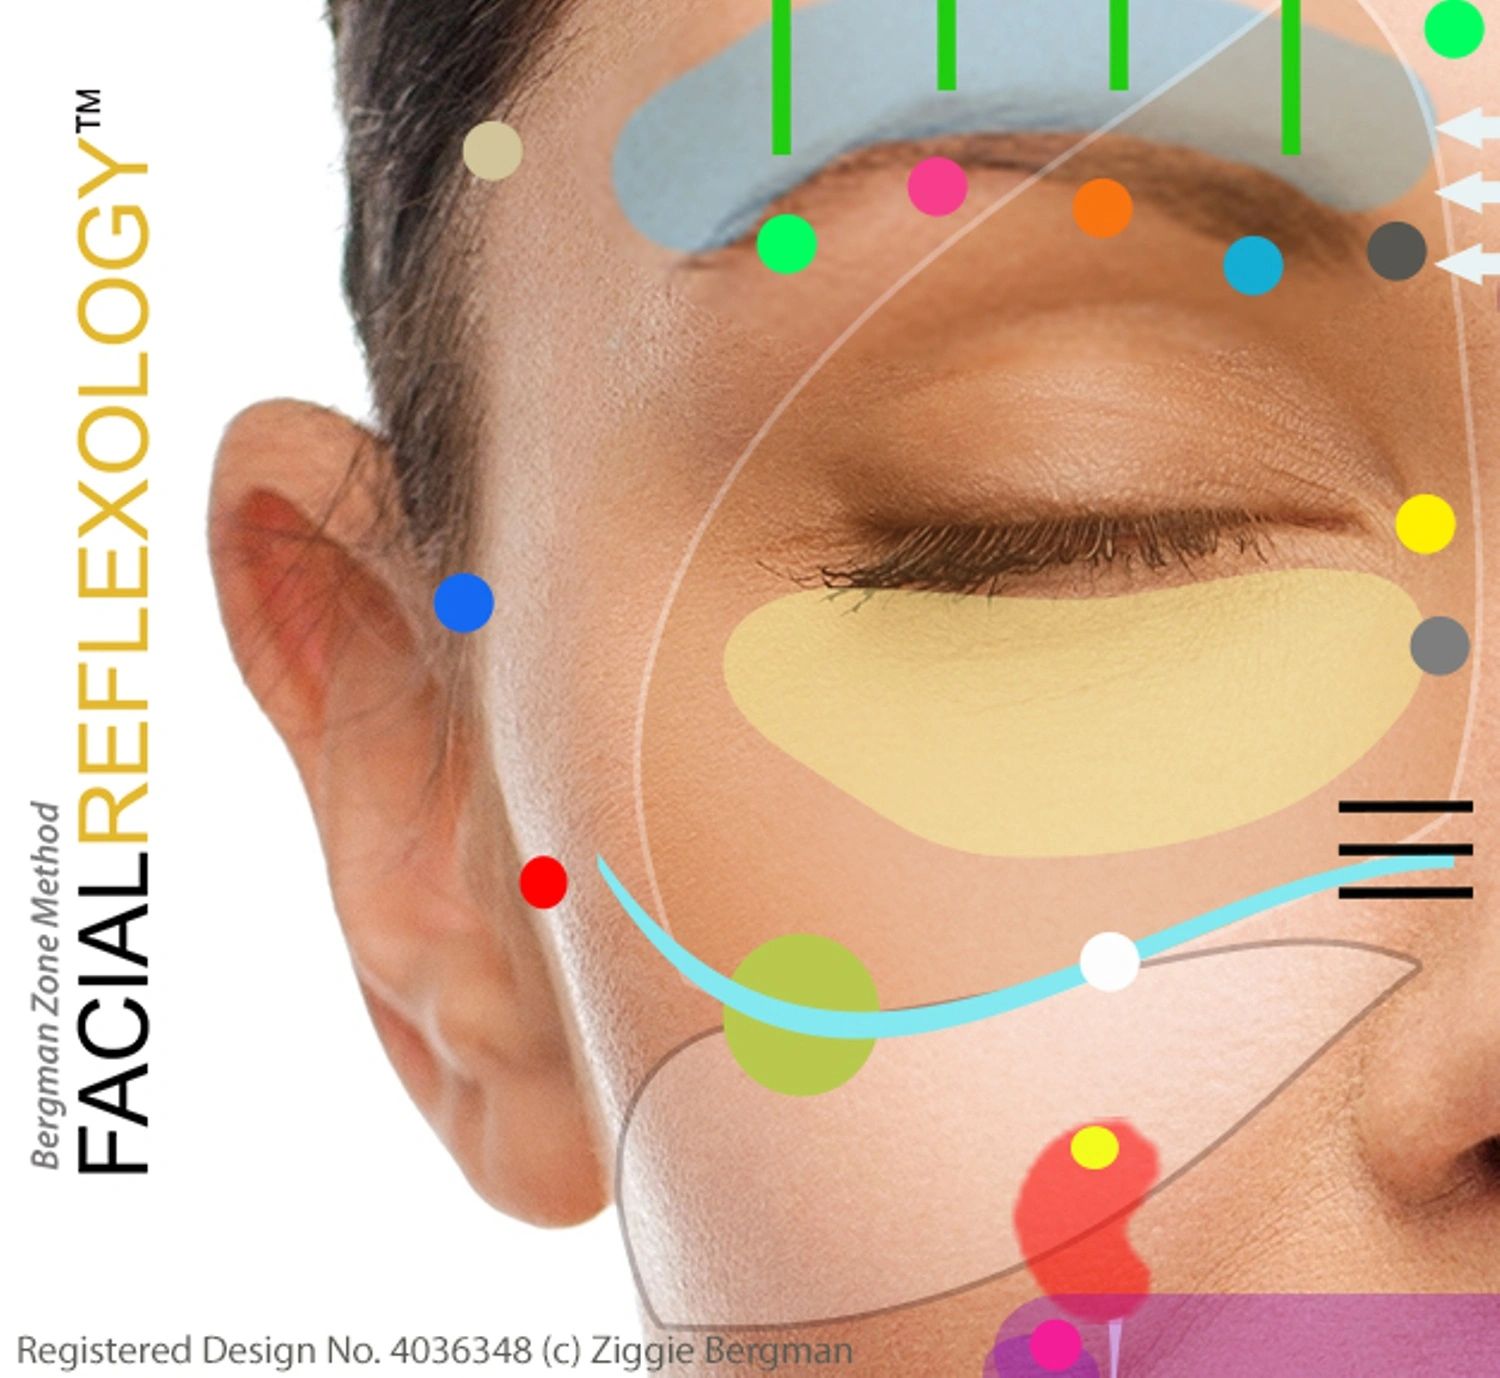 woman with peaceful eyes closed facial reflexology points shown on face